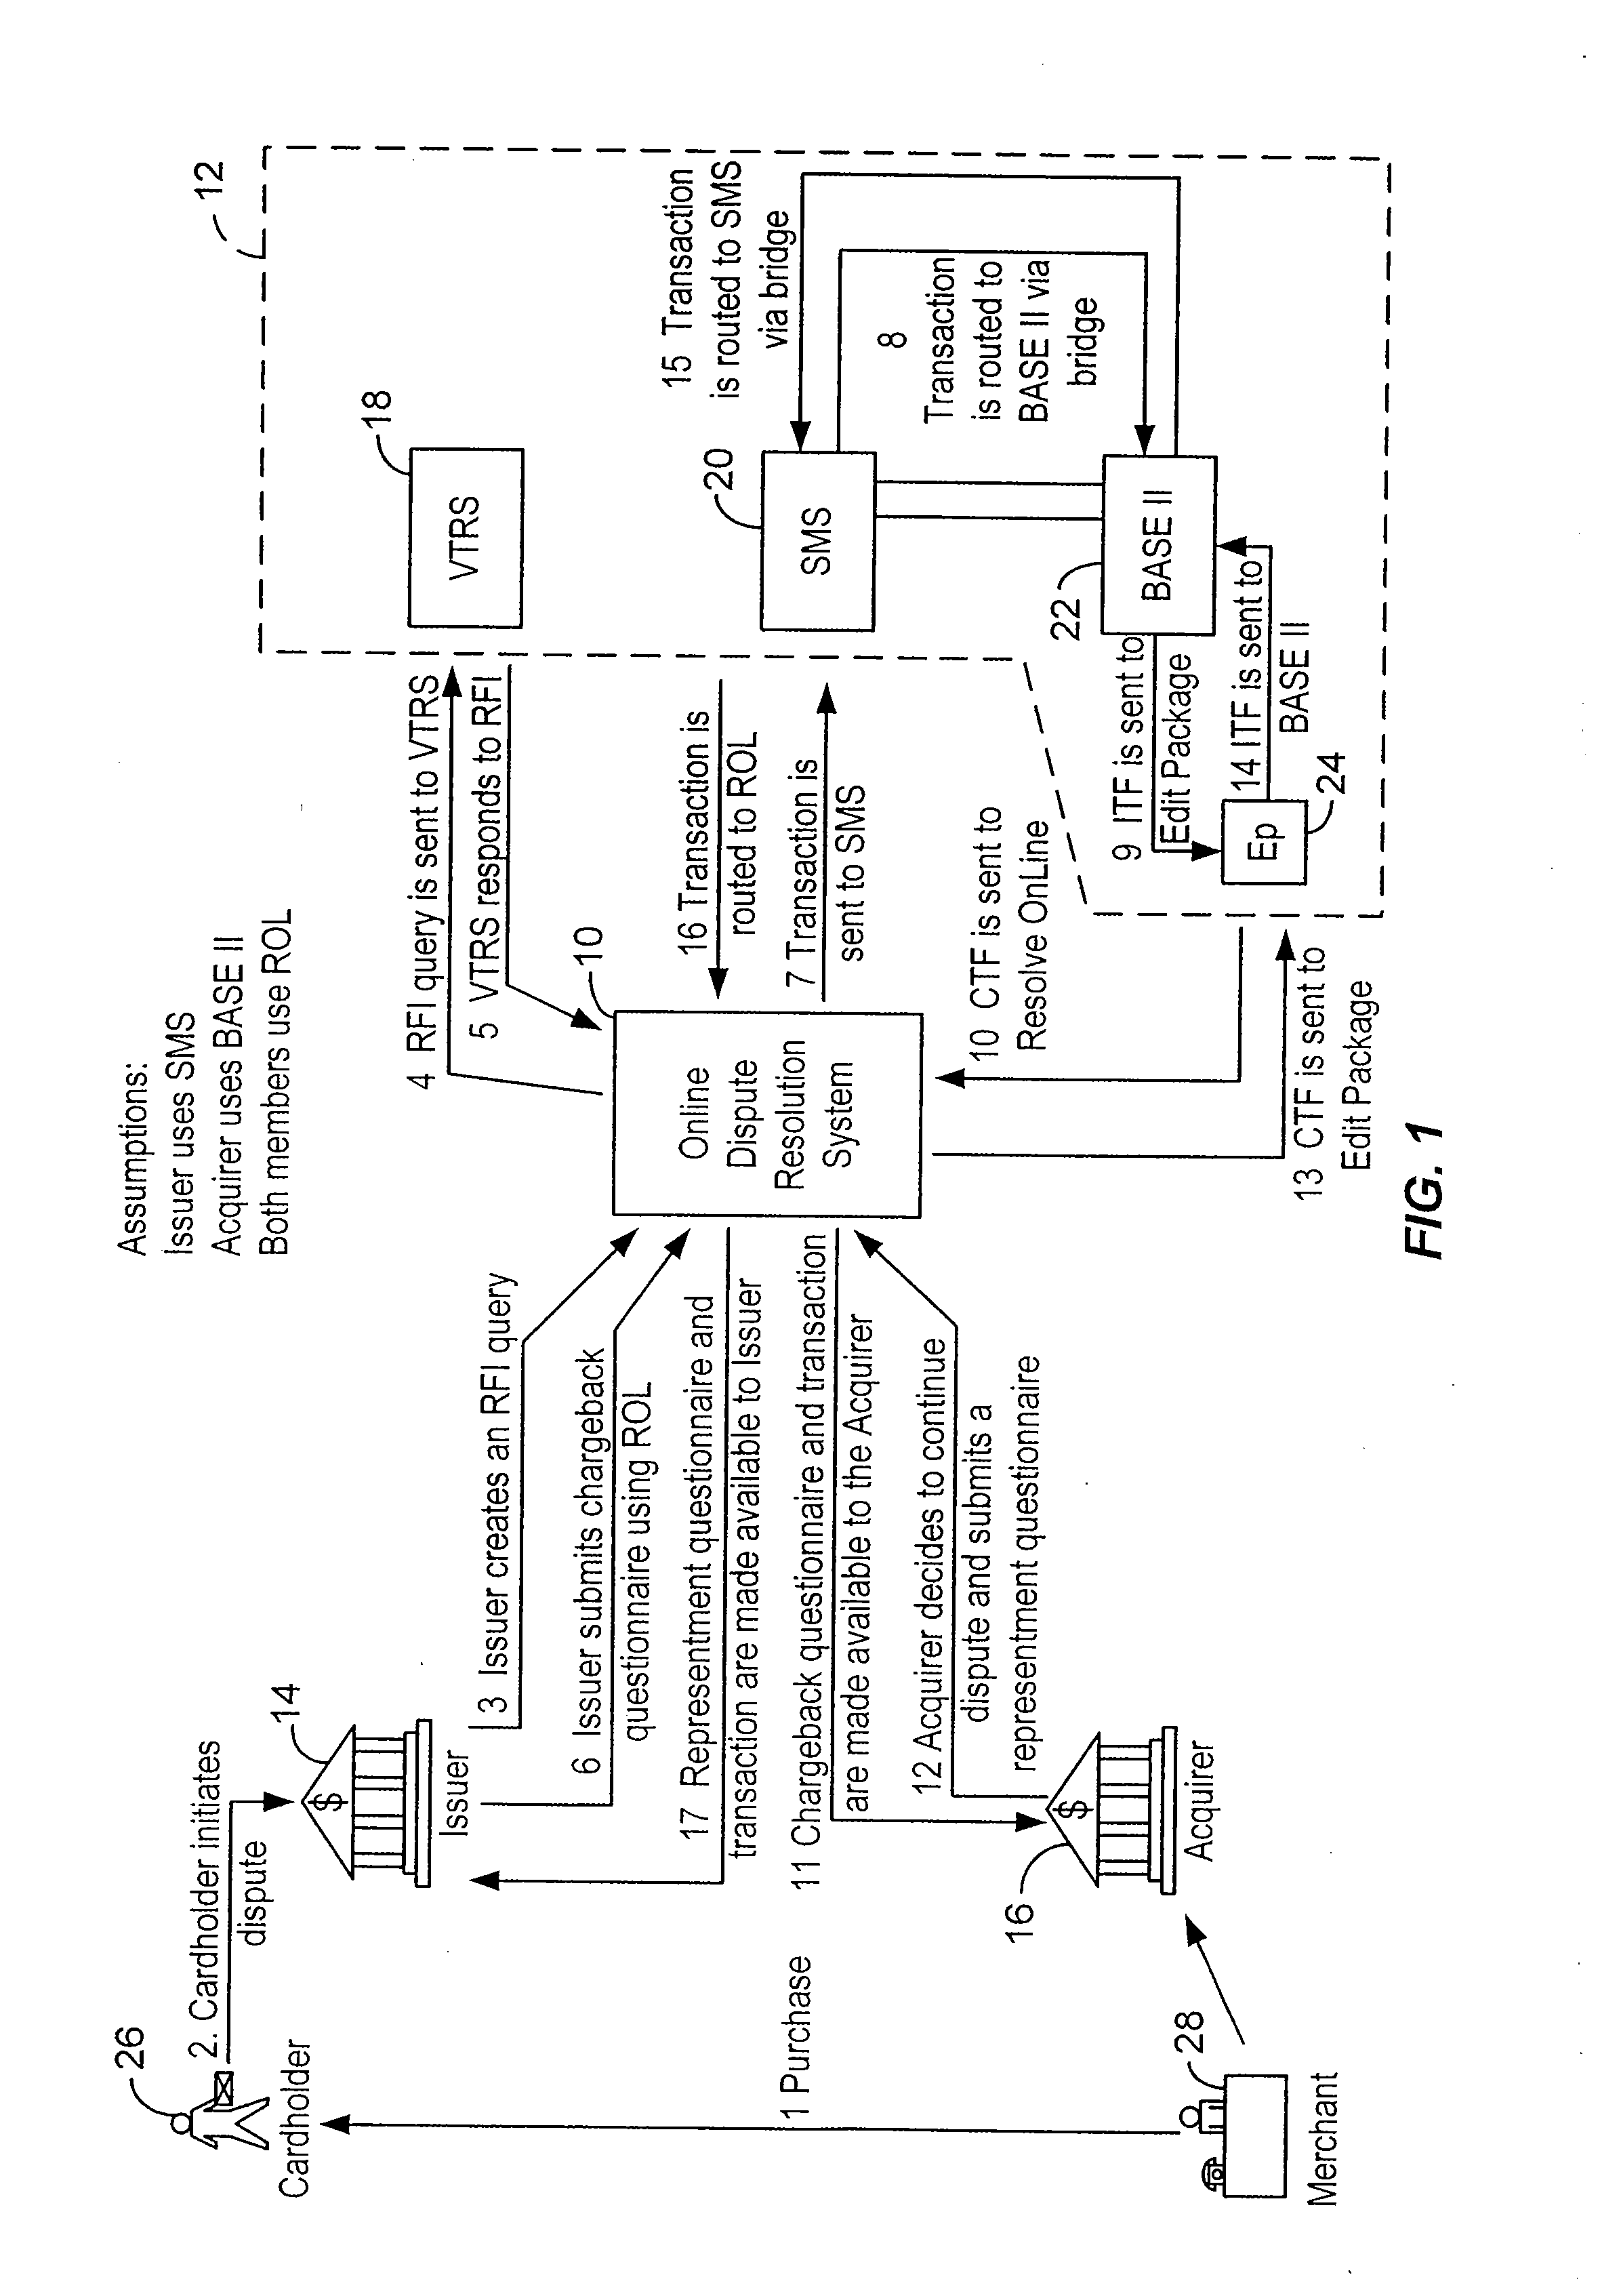 Method and system for facilitating electronic dispute resolution